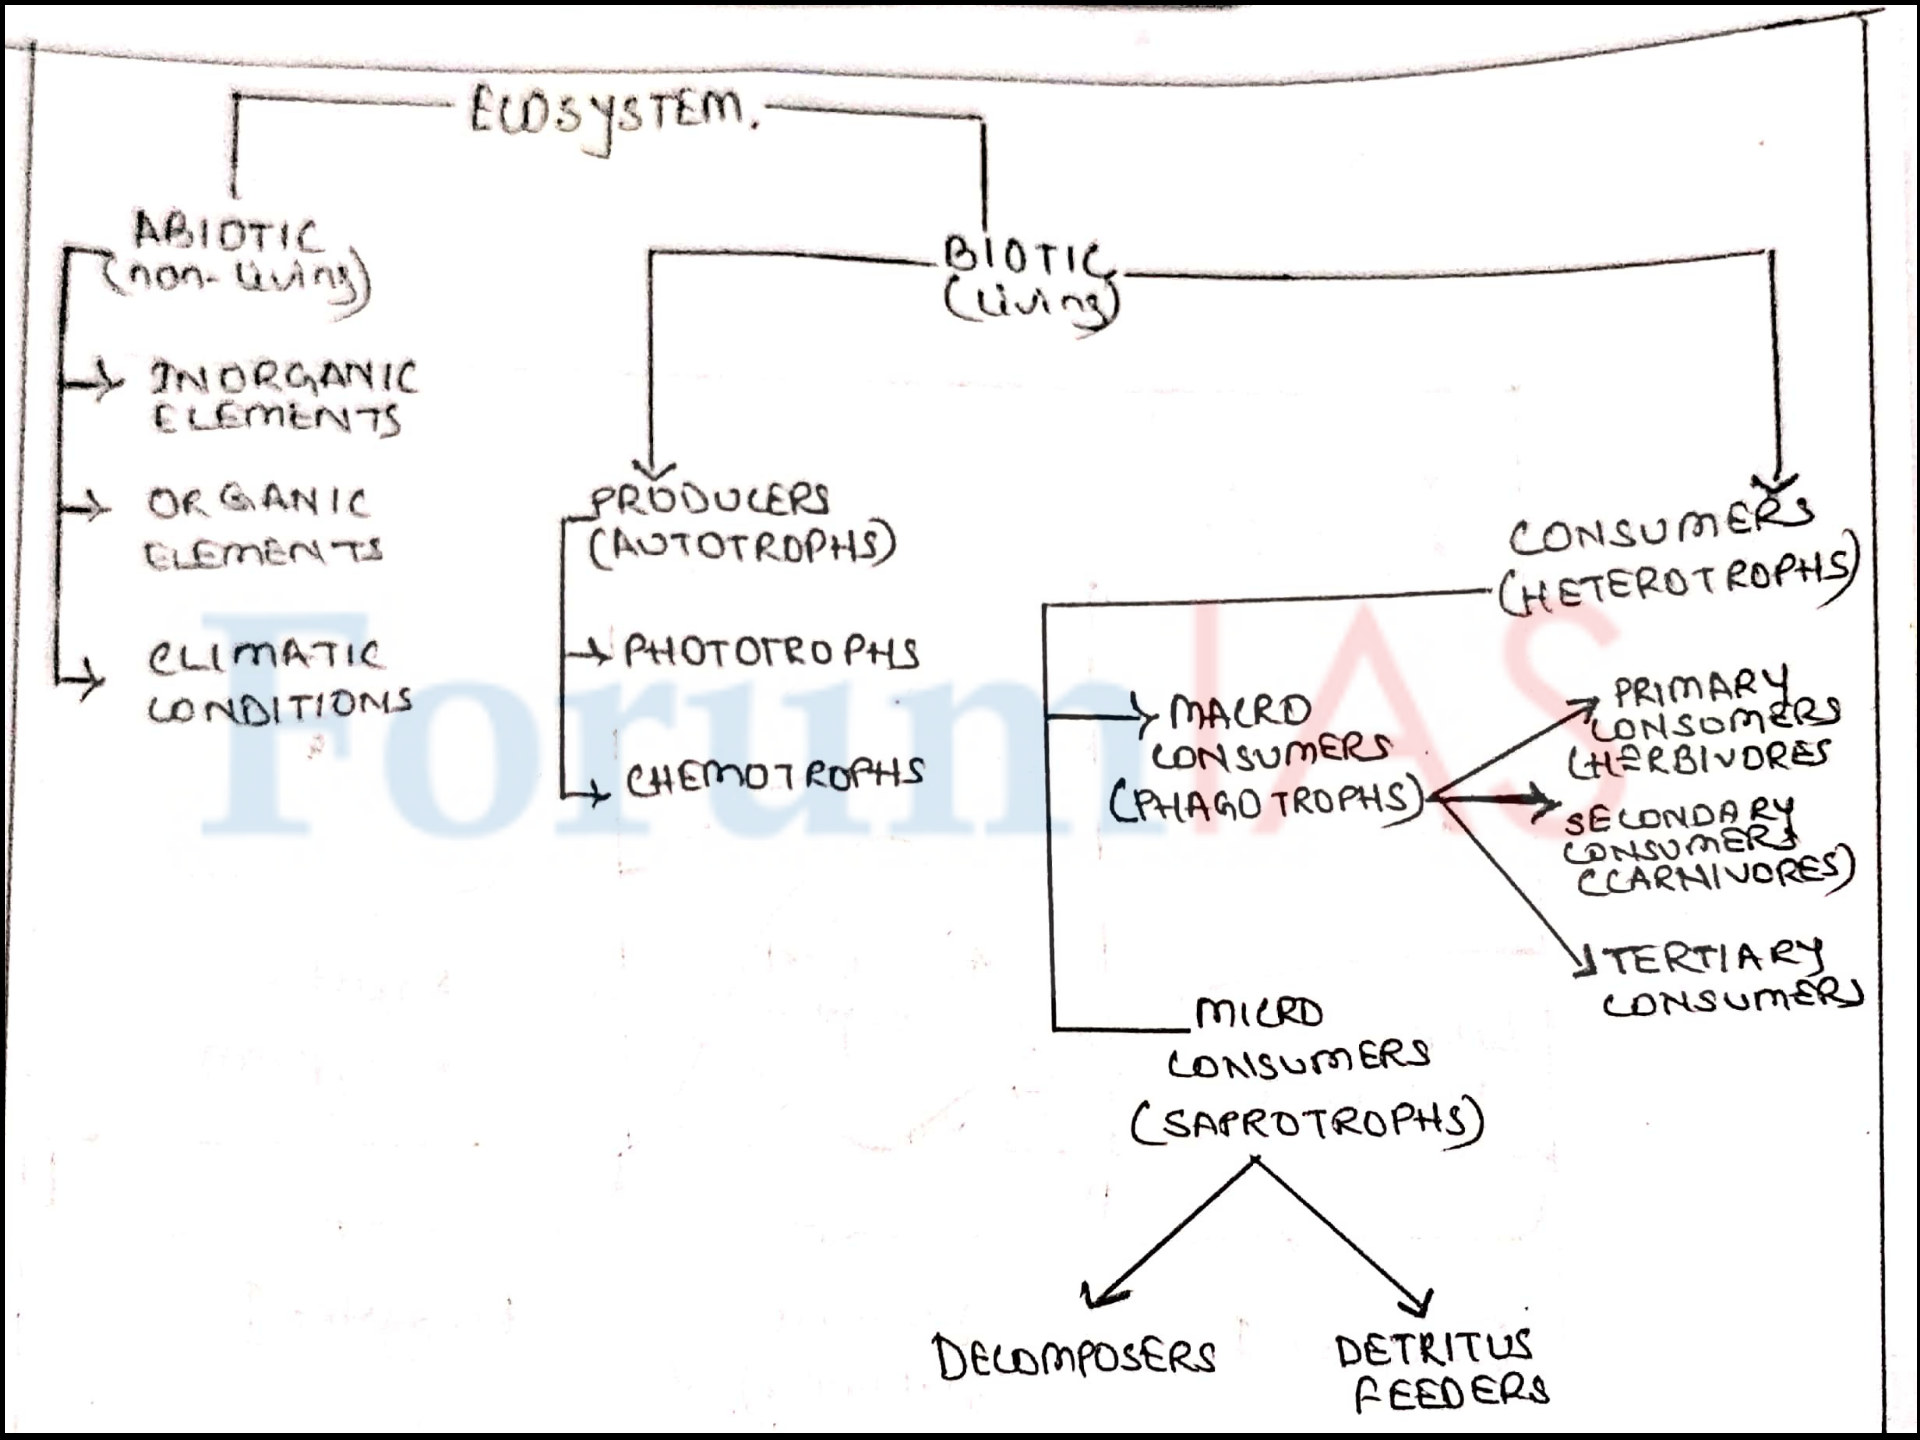 Structure of an Ecosystem